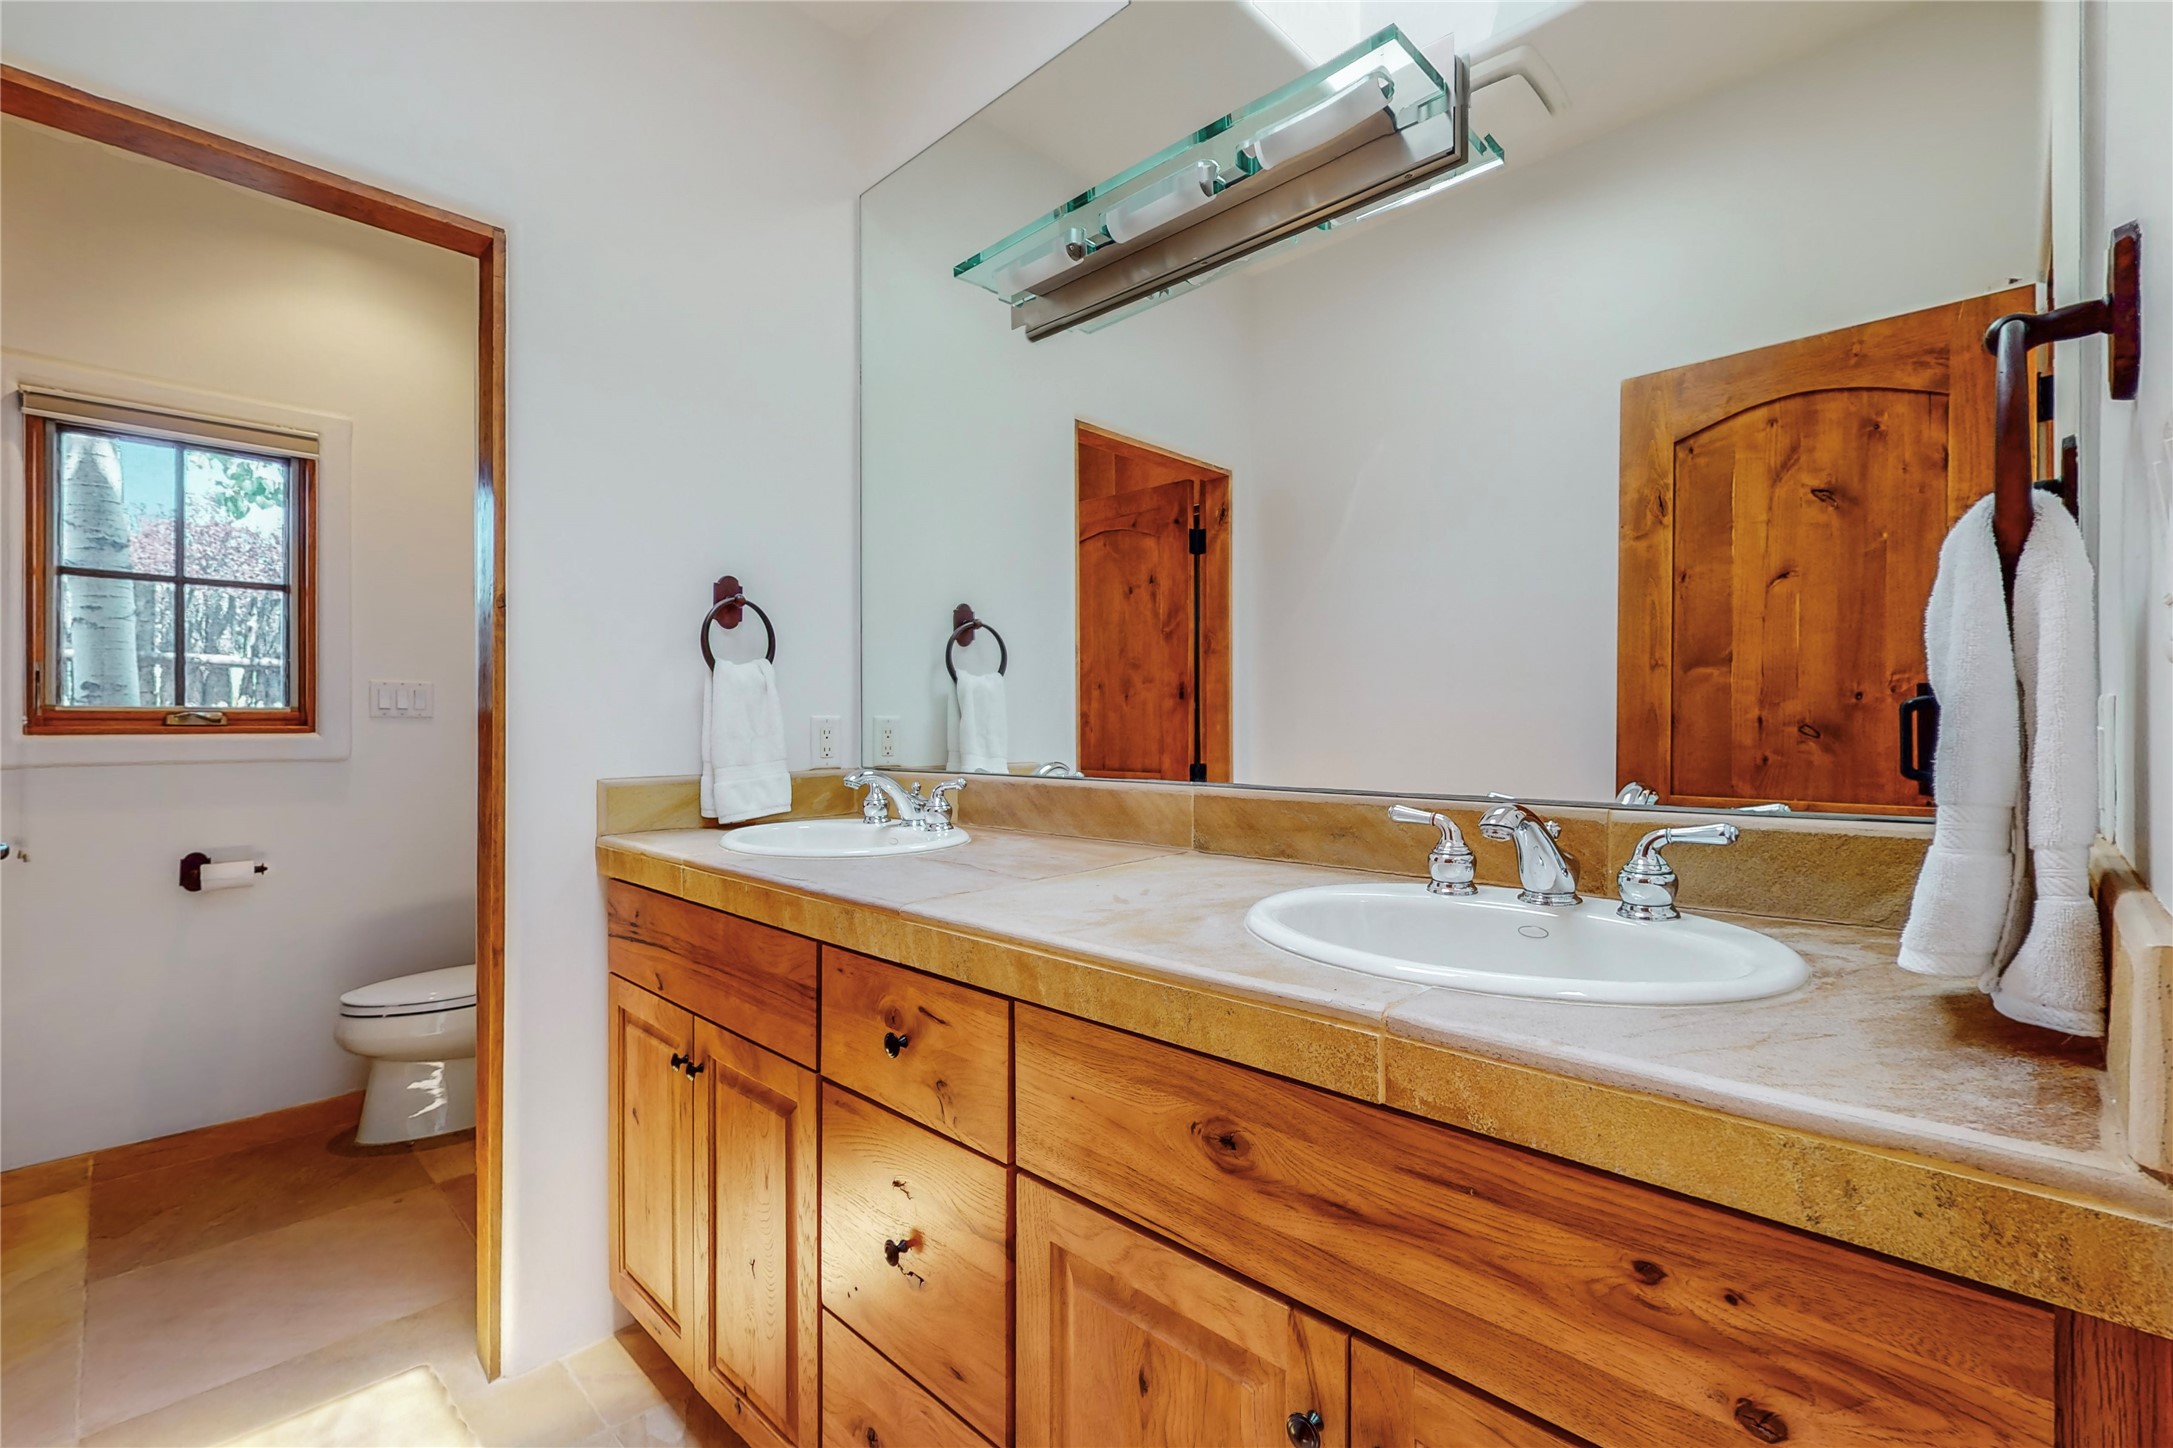 Full bath serves the two guest bedrooms